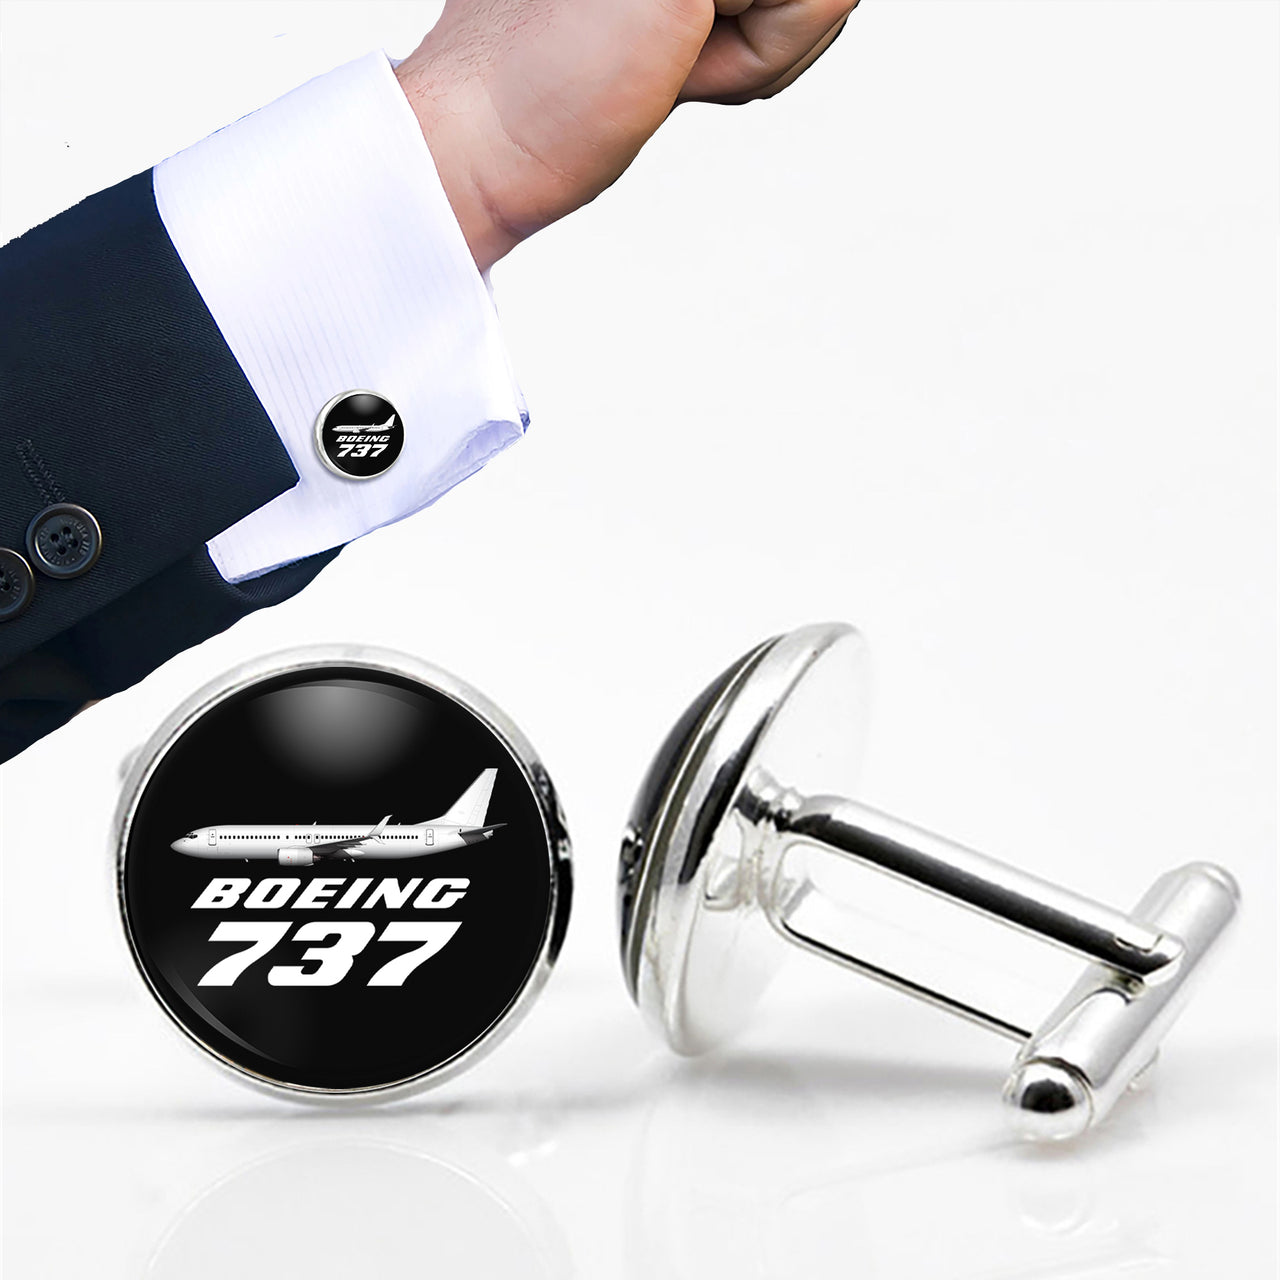 The Boeing 737 Designed Cuff Links